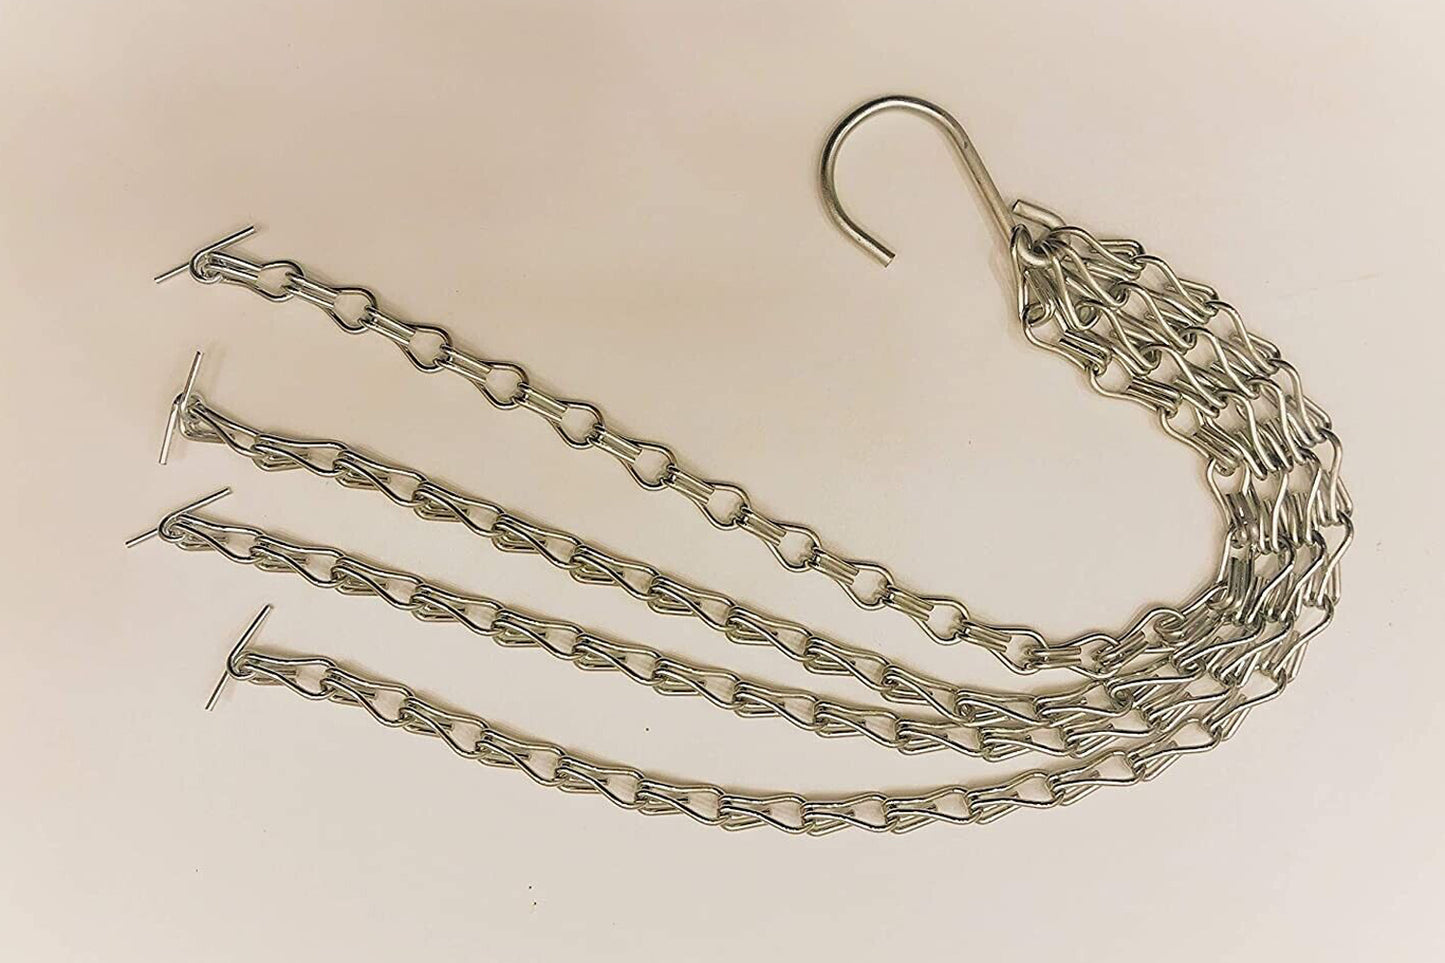 2x Metal Chain Sets with T-Bar for Easy Fill Baskets